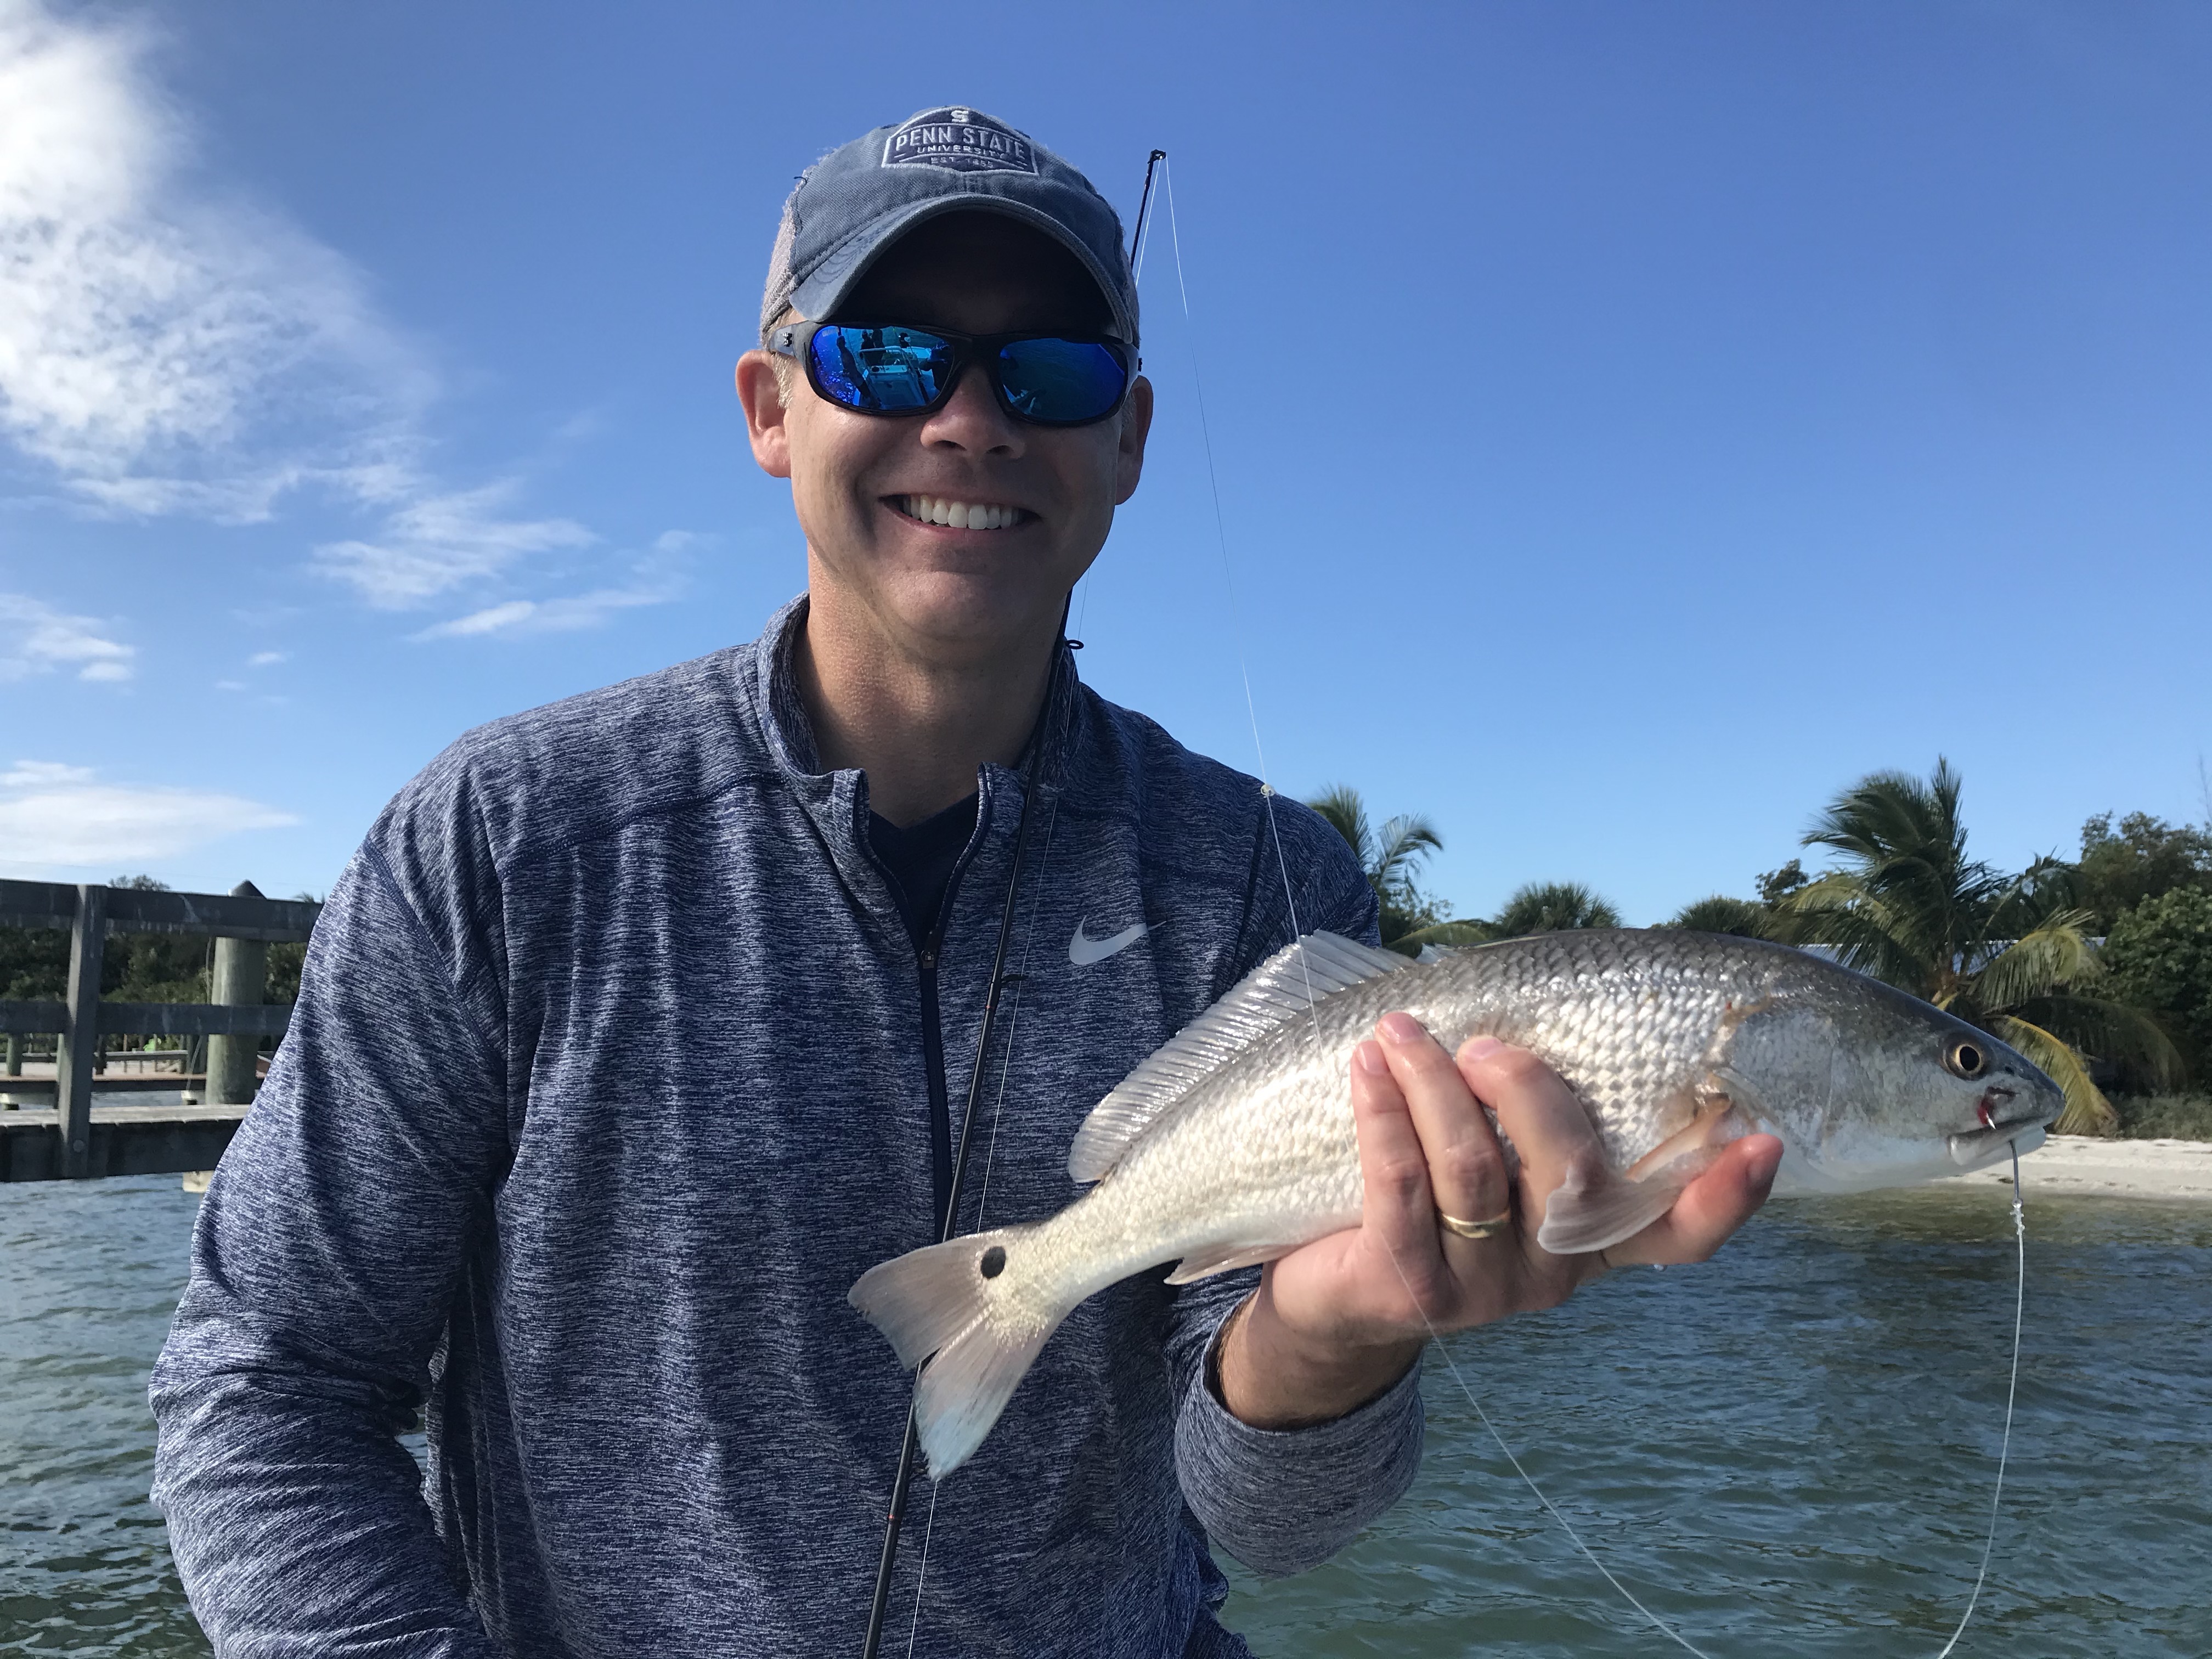 Dick's son-in-law holding his Redfish catch